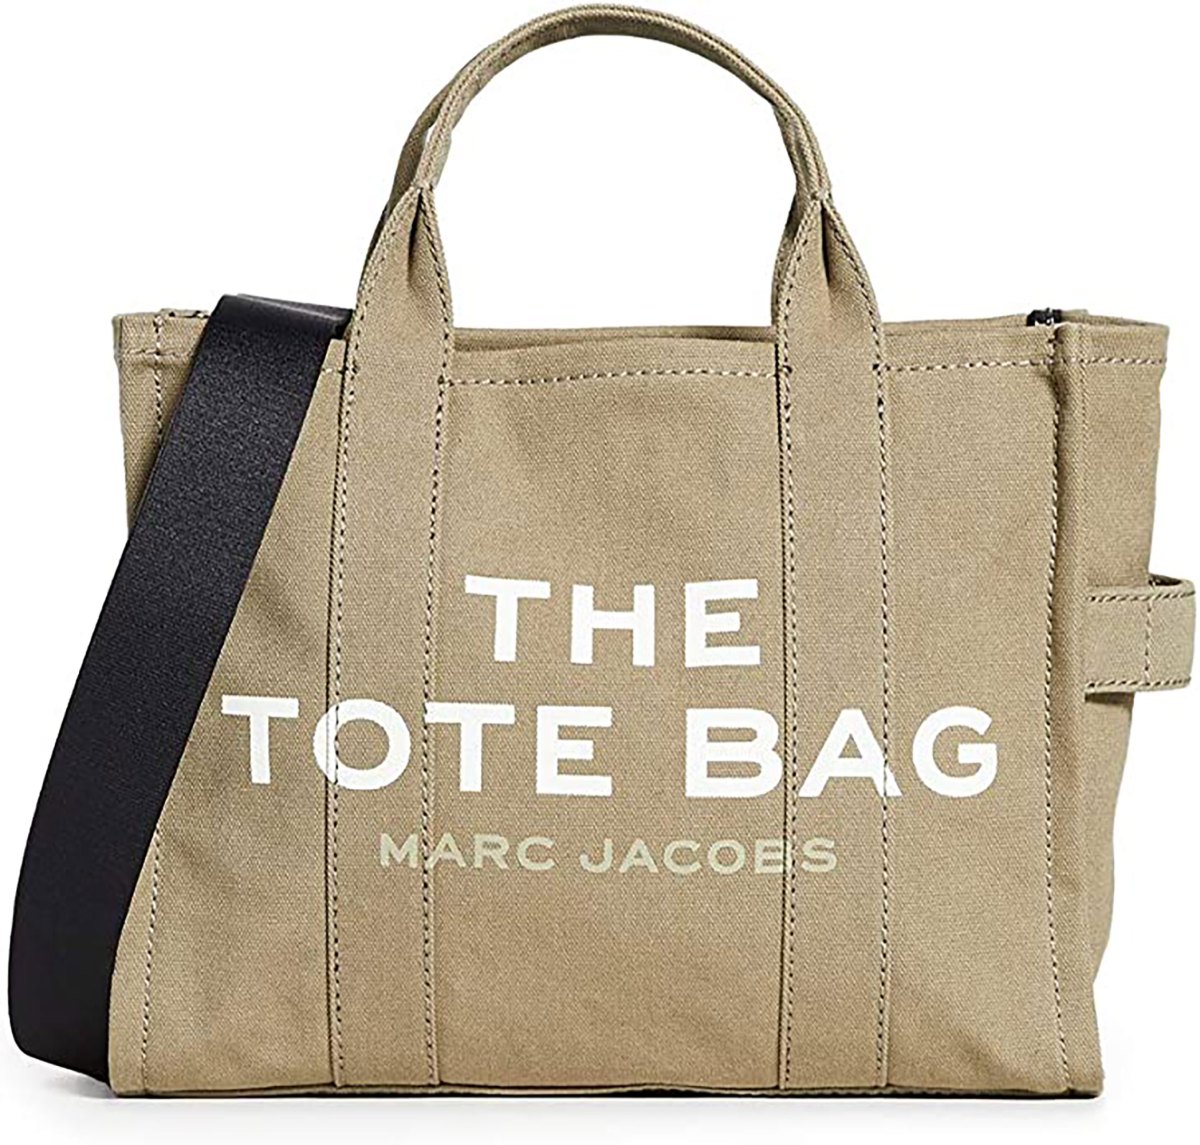 Marc Jacobs Tote Bag Review (+why everyone is obsessed with it